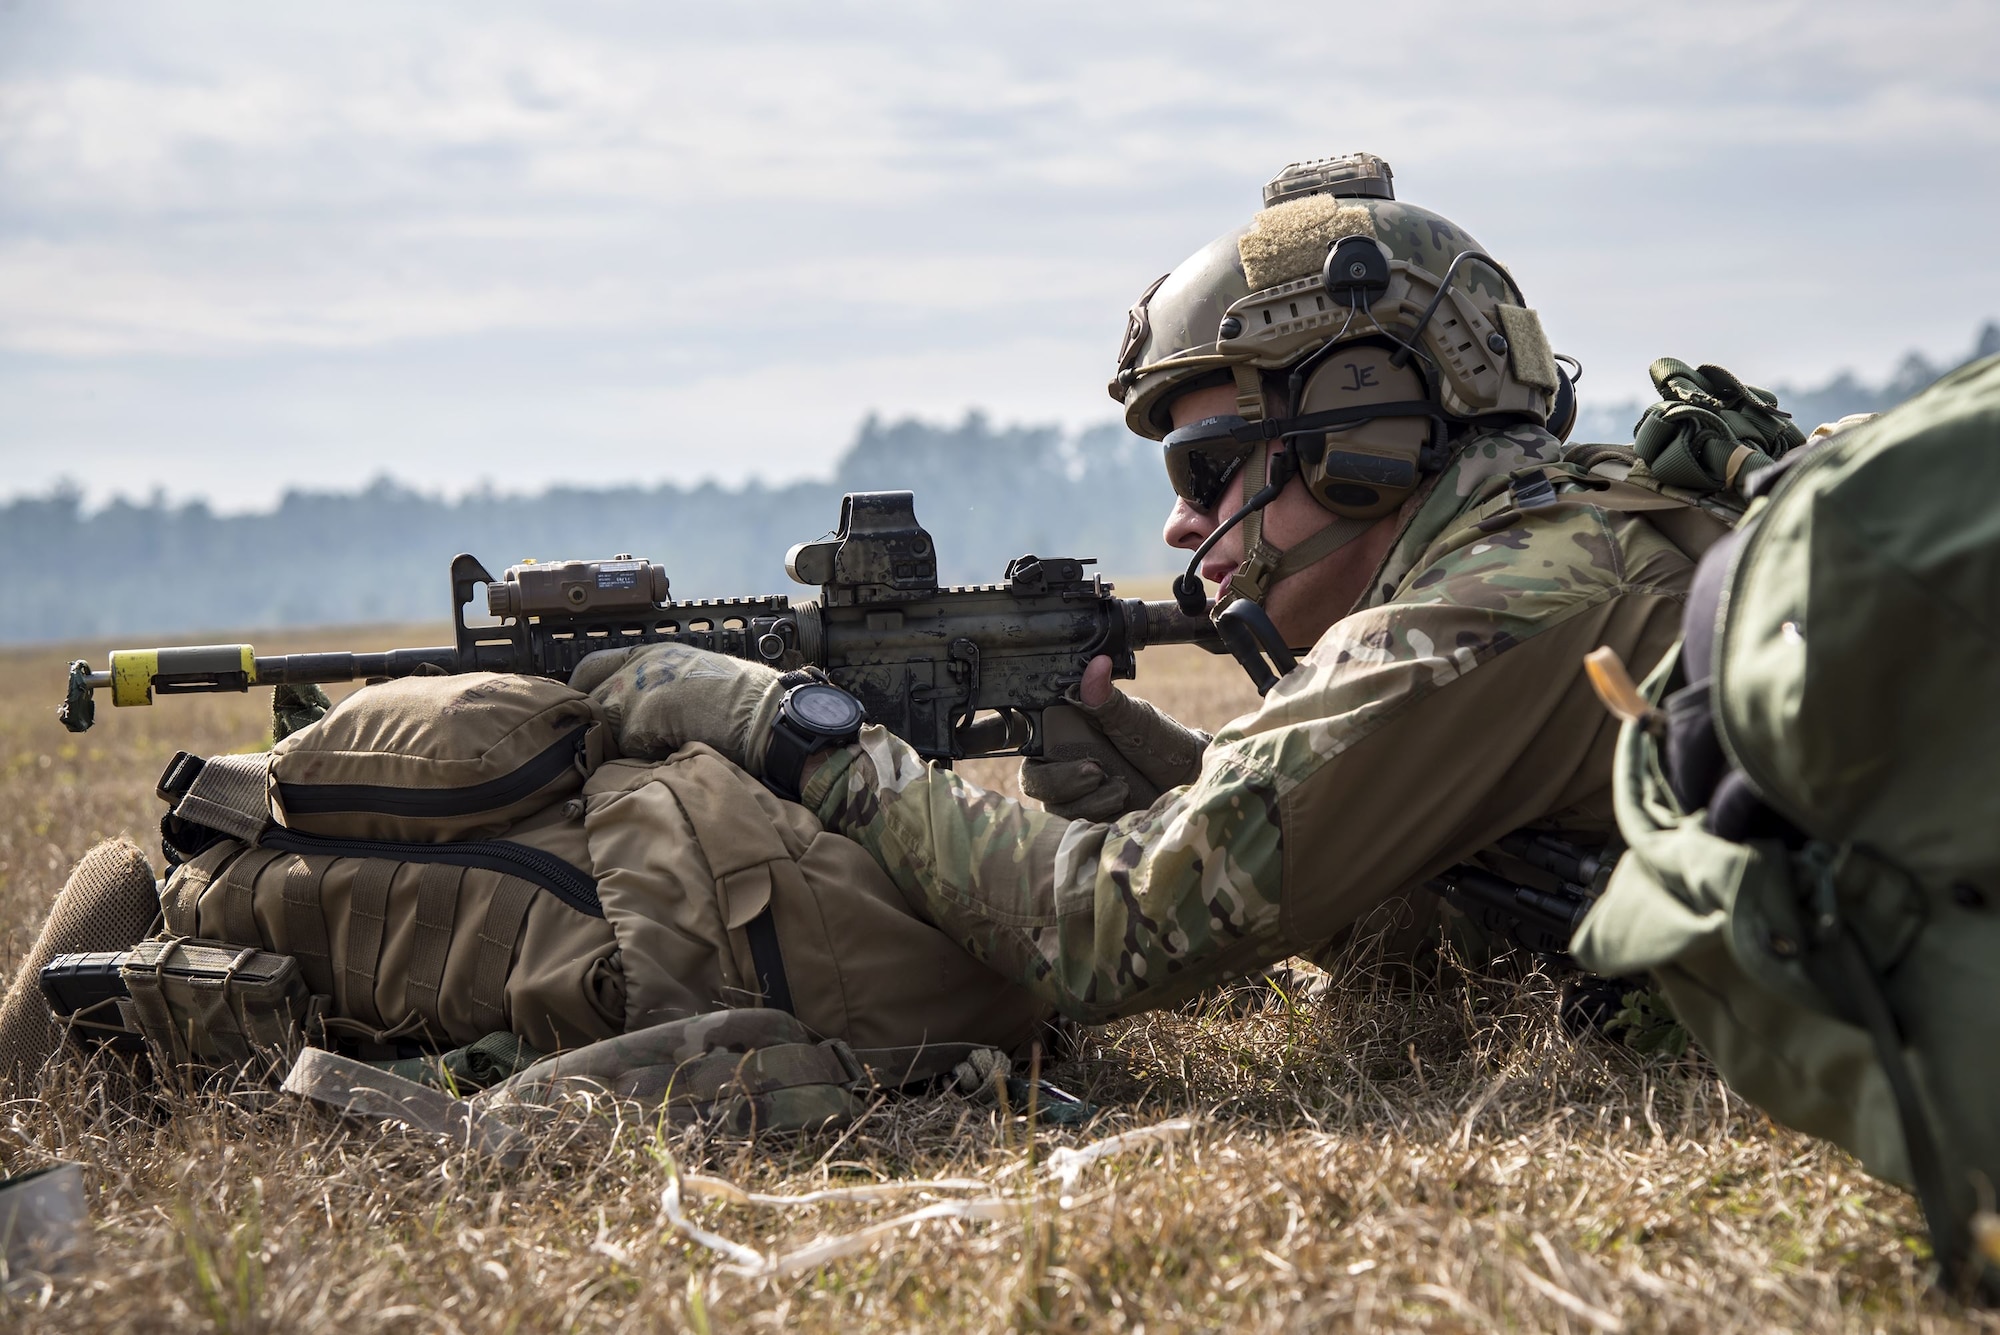 A pararescueman from the 38th Rescue Squadron (RQS) looks down the sight of his rifle during a full mission profile, Dec. 14, 2017, at Moody Air Force Base, Ga. During the training, the 38th RQS recovered victims while under enemy fire to prepare for future search and rescue missions and to assess their unit’s ability to work cohesively to accomplish the mission. (U.S. Air Force photo by Airman Eugene Oliver)